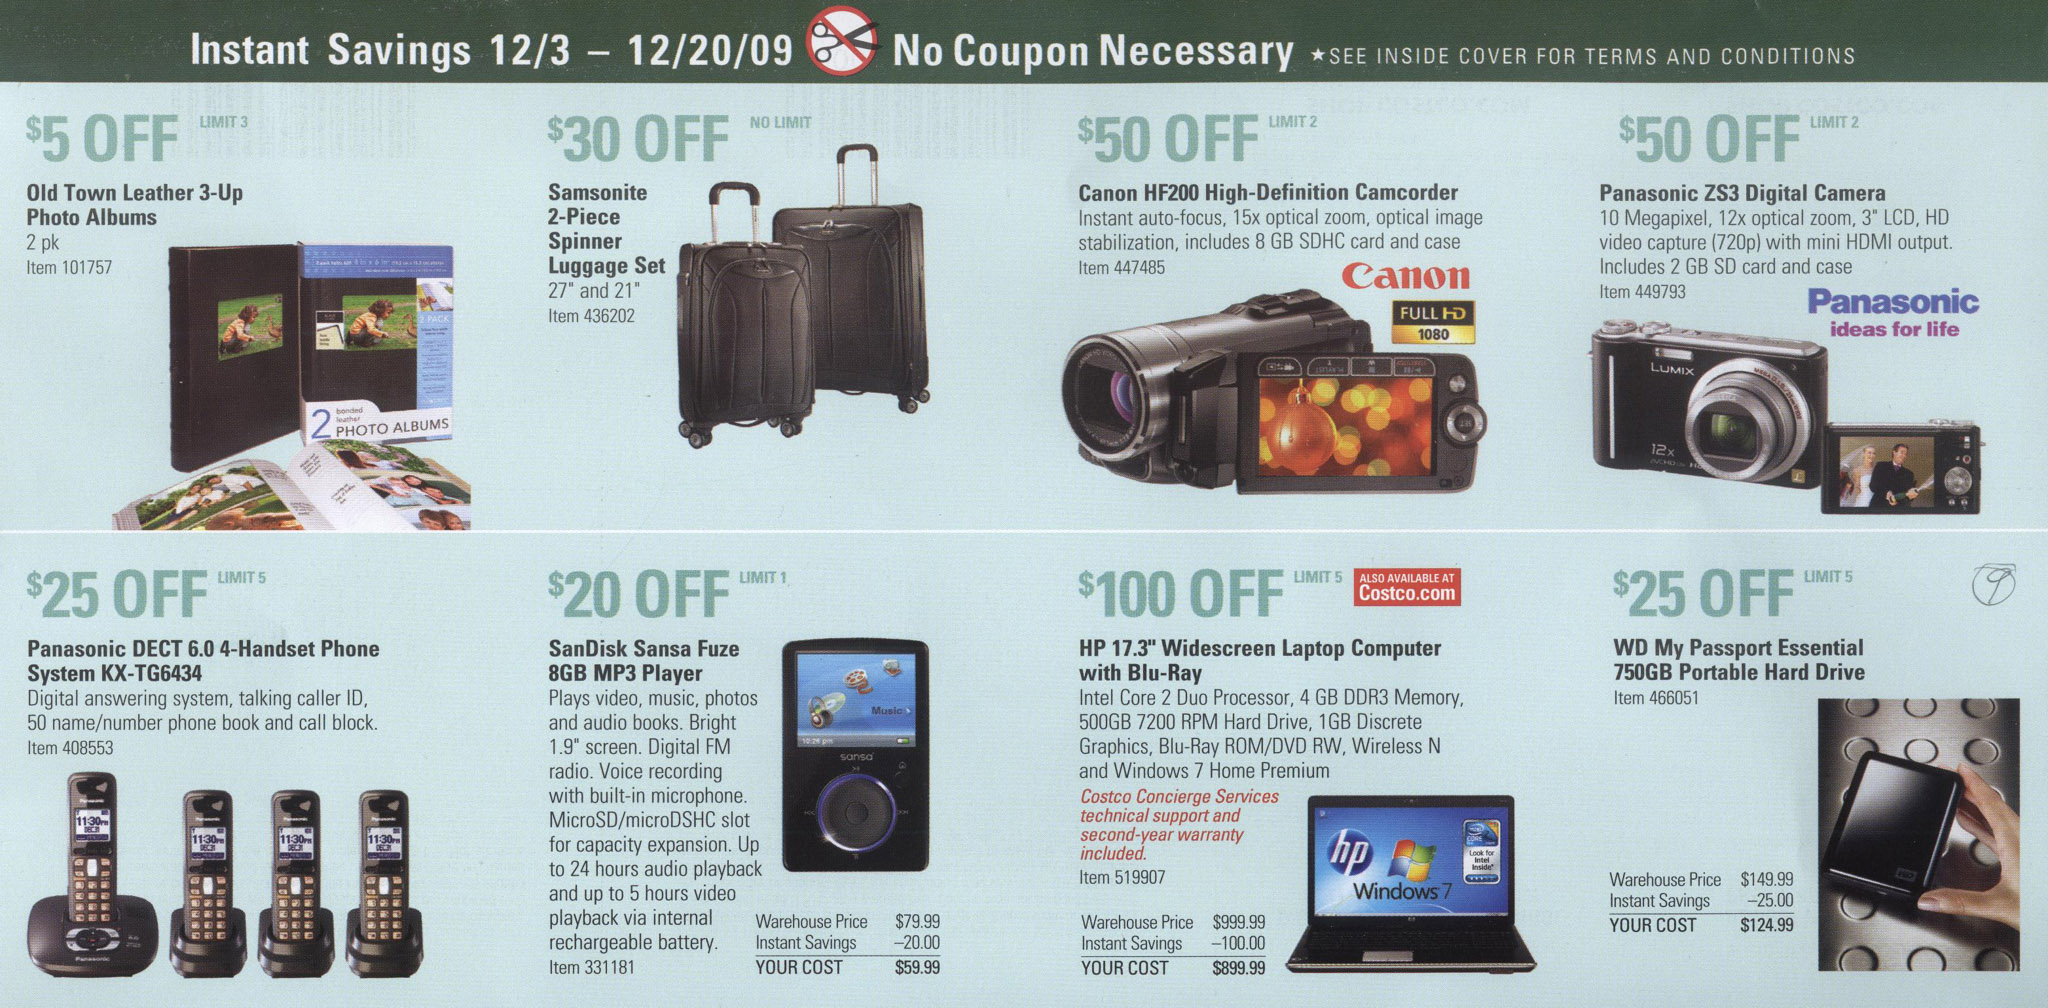 Coupon book page 9 in full-size.